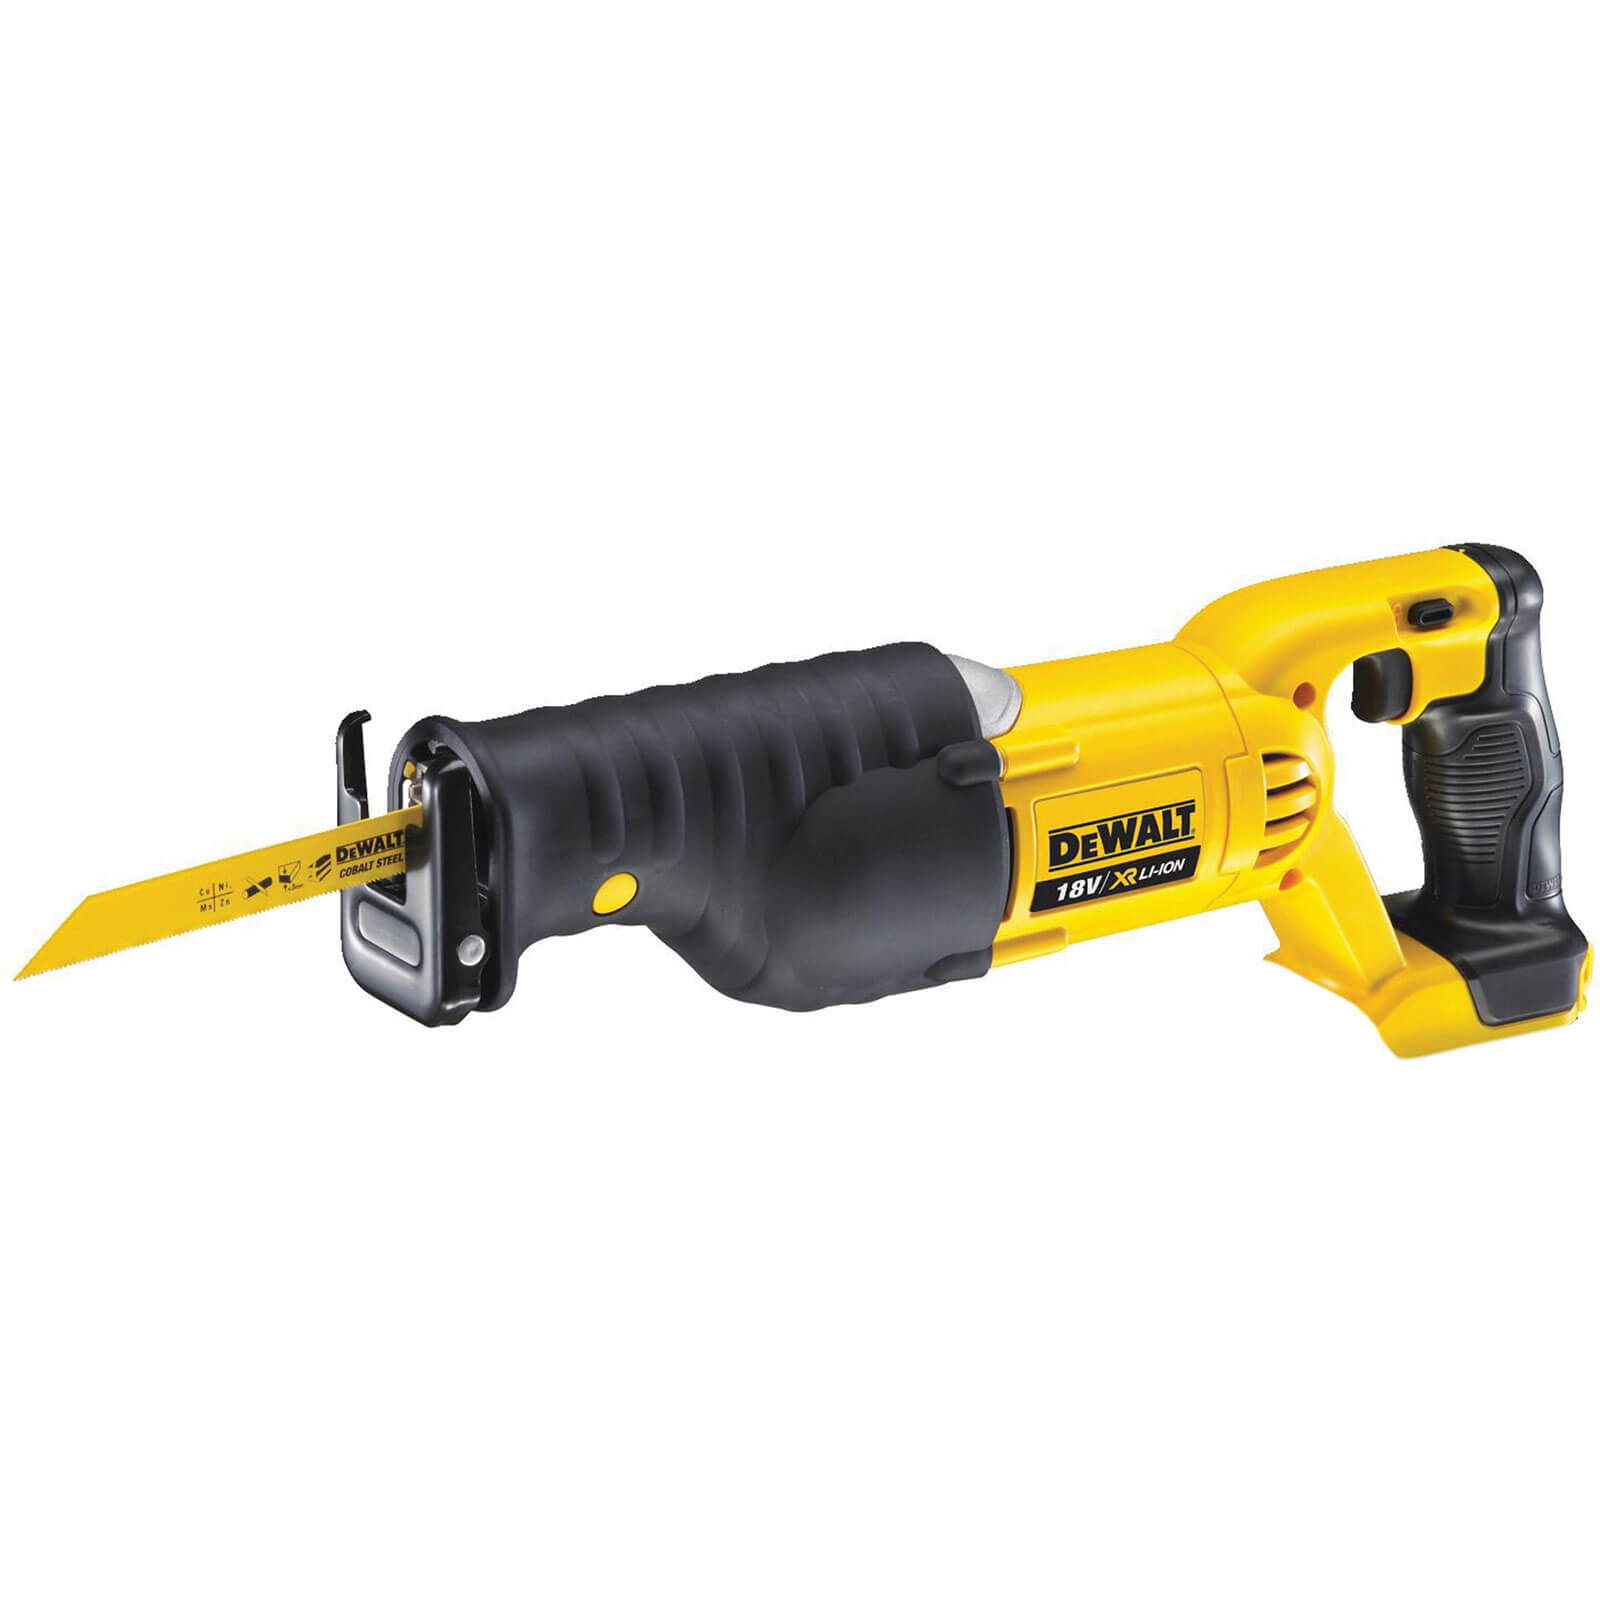 DeWalt DCS380N 18v Cordless Lithium Ion XR Reciprocating Saw without Battery or Charger